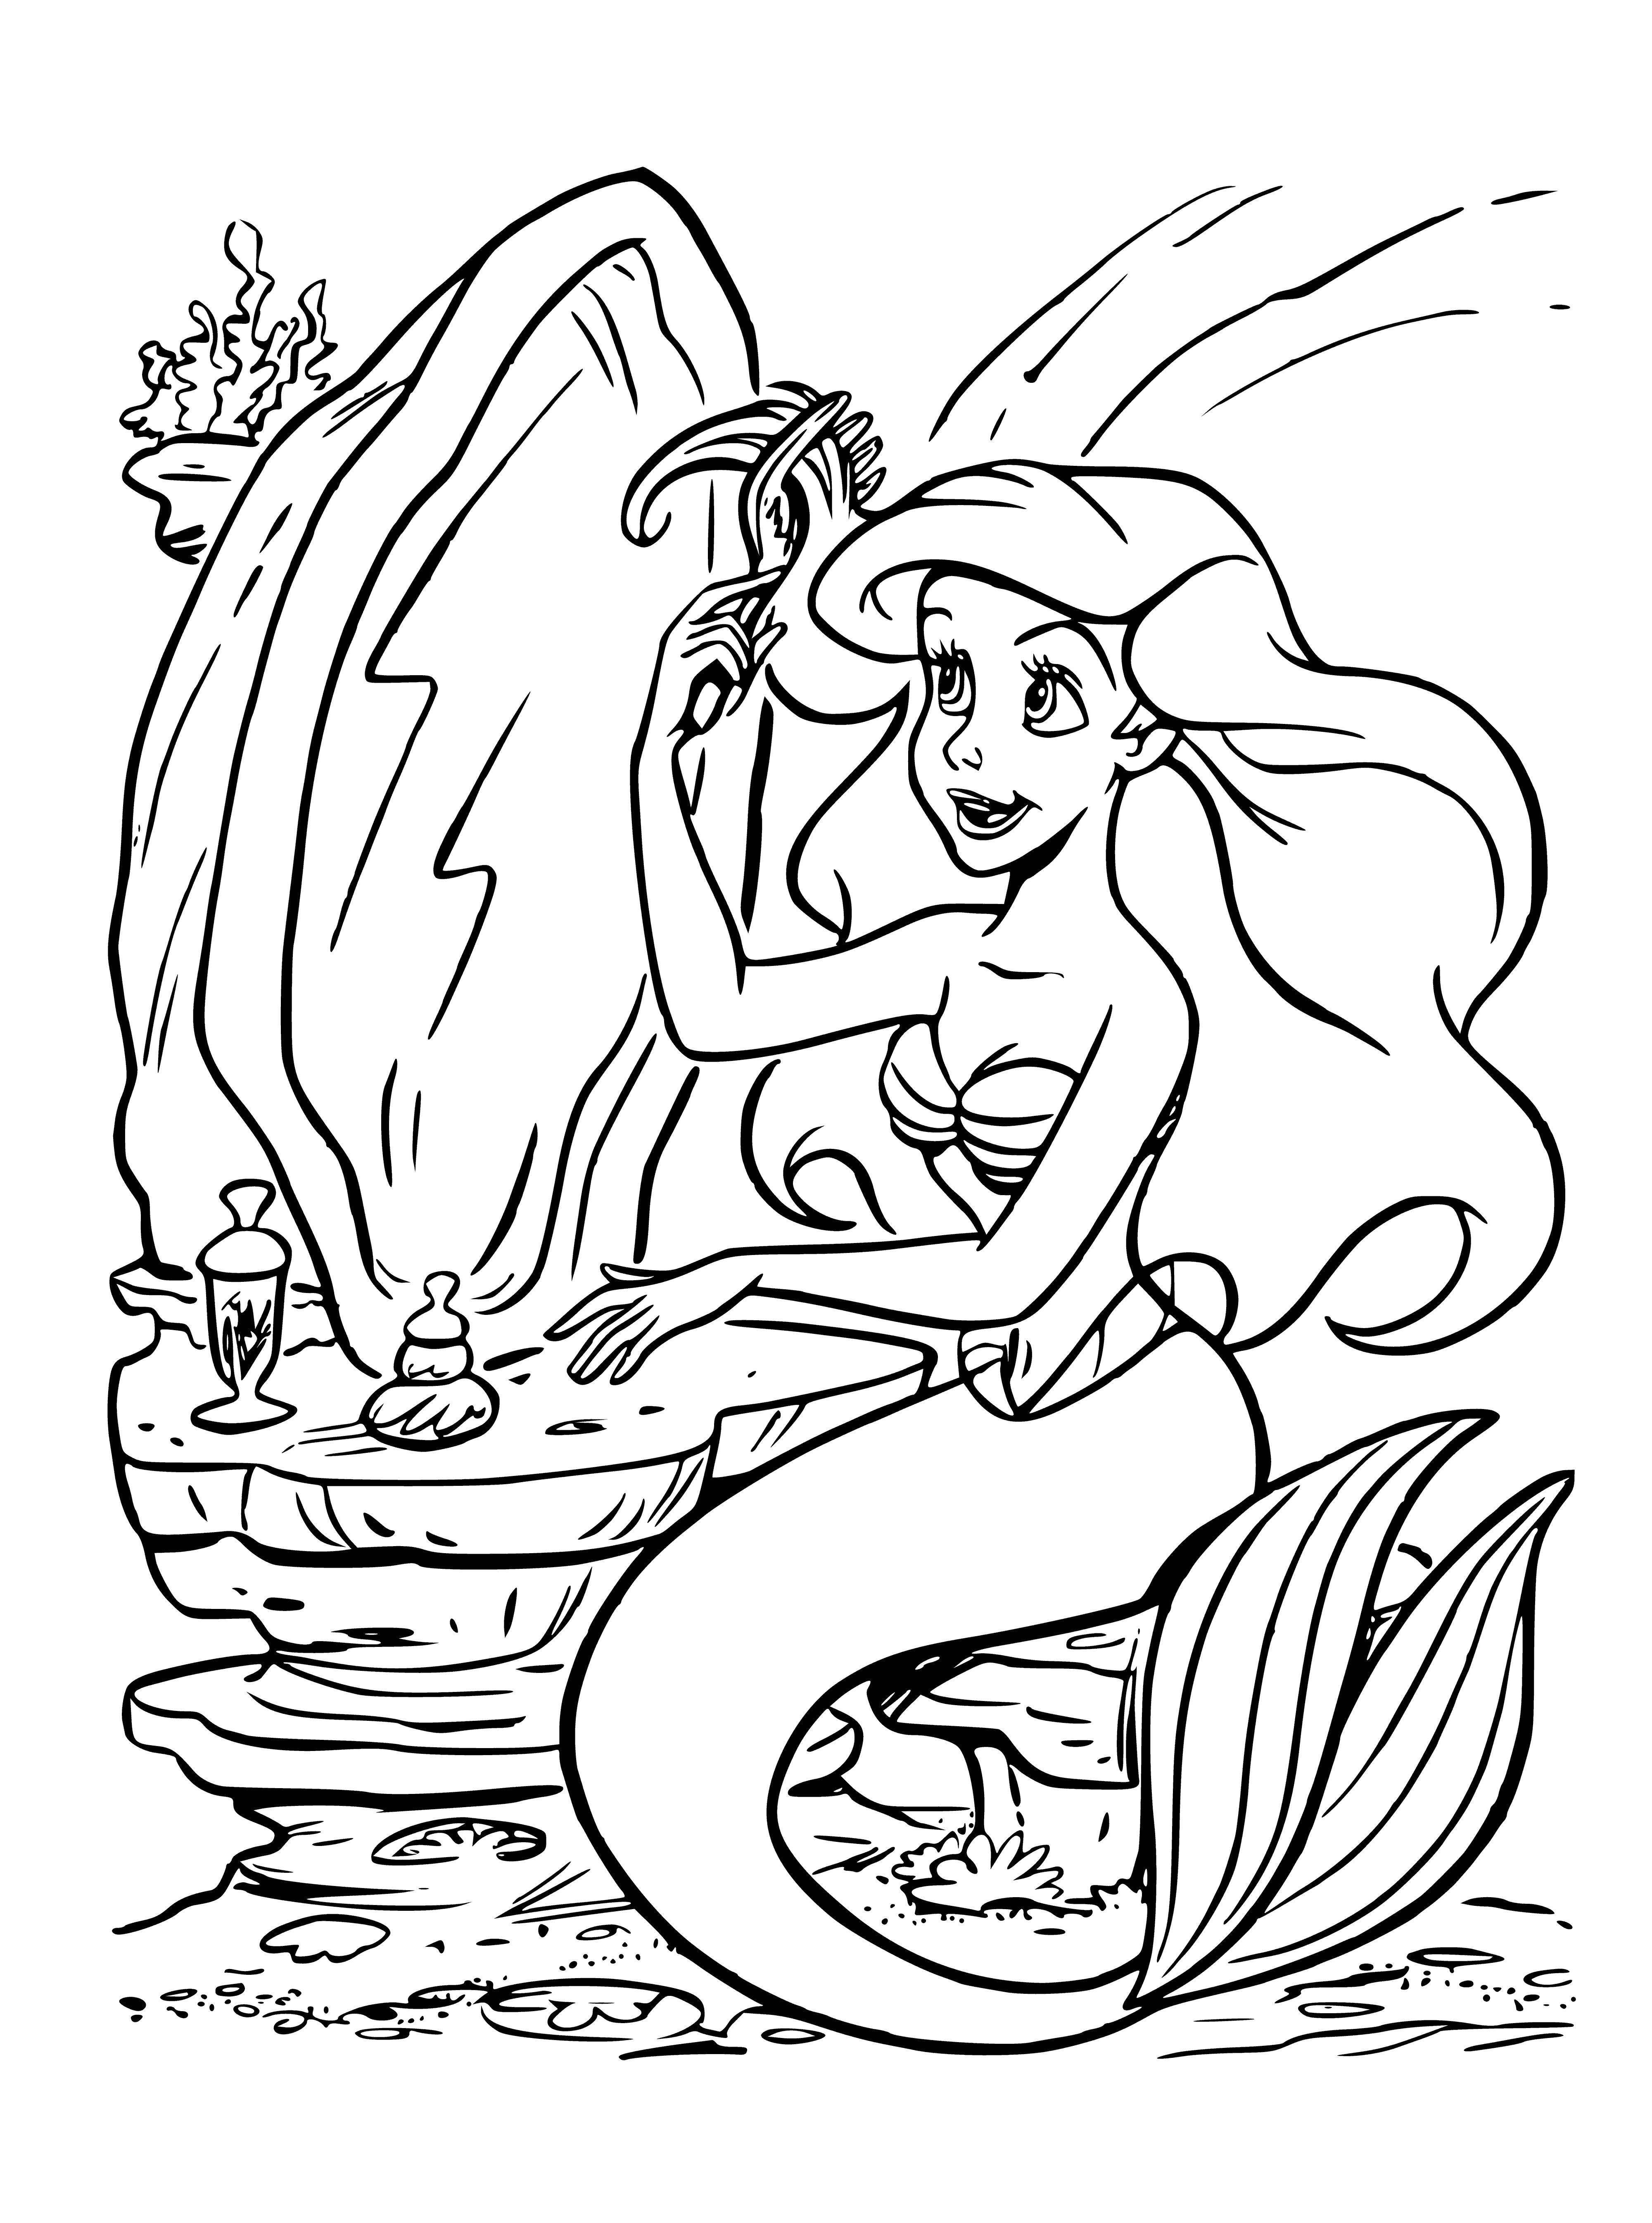 coloring page: Girl stares at reflection in pool, holding comb & fork. She has long blond hair & wears white dress w/ blue sash.